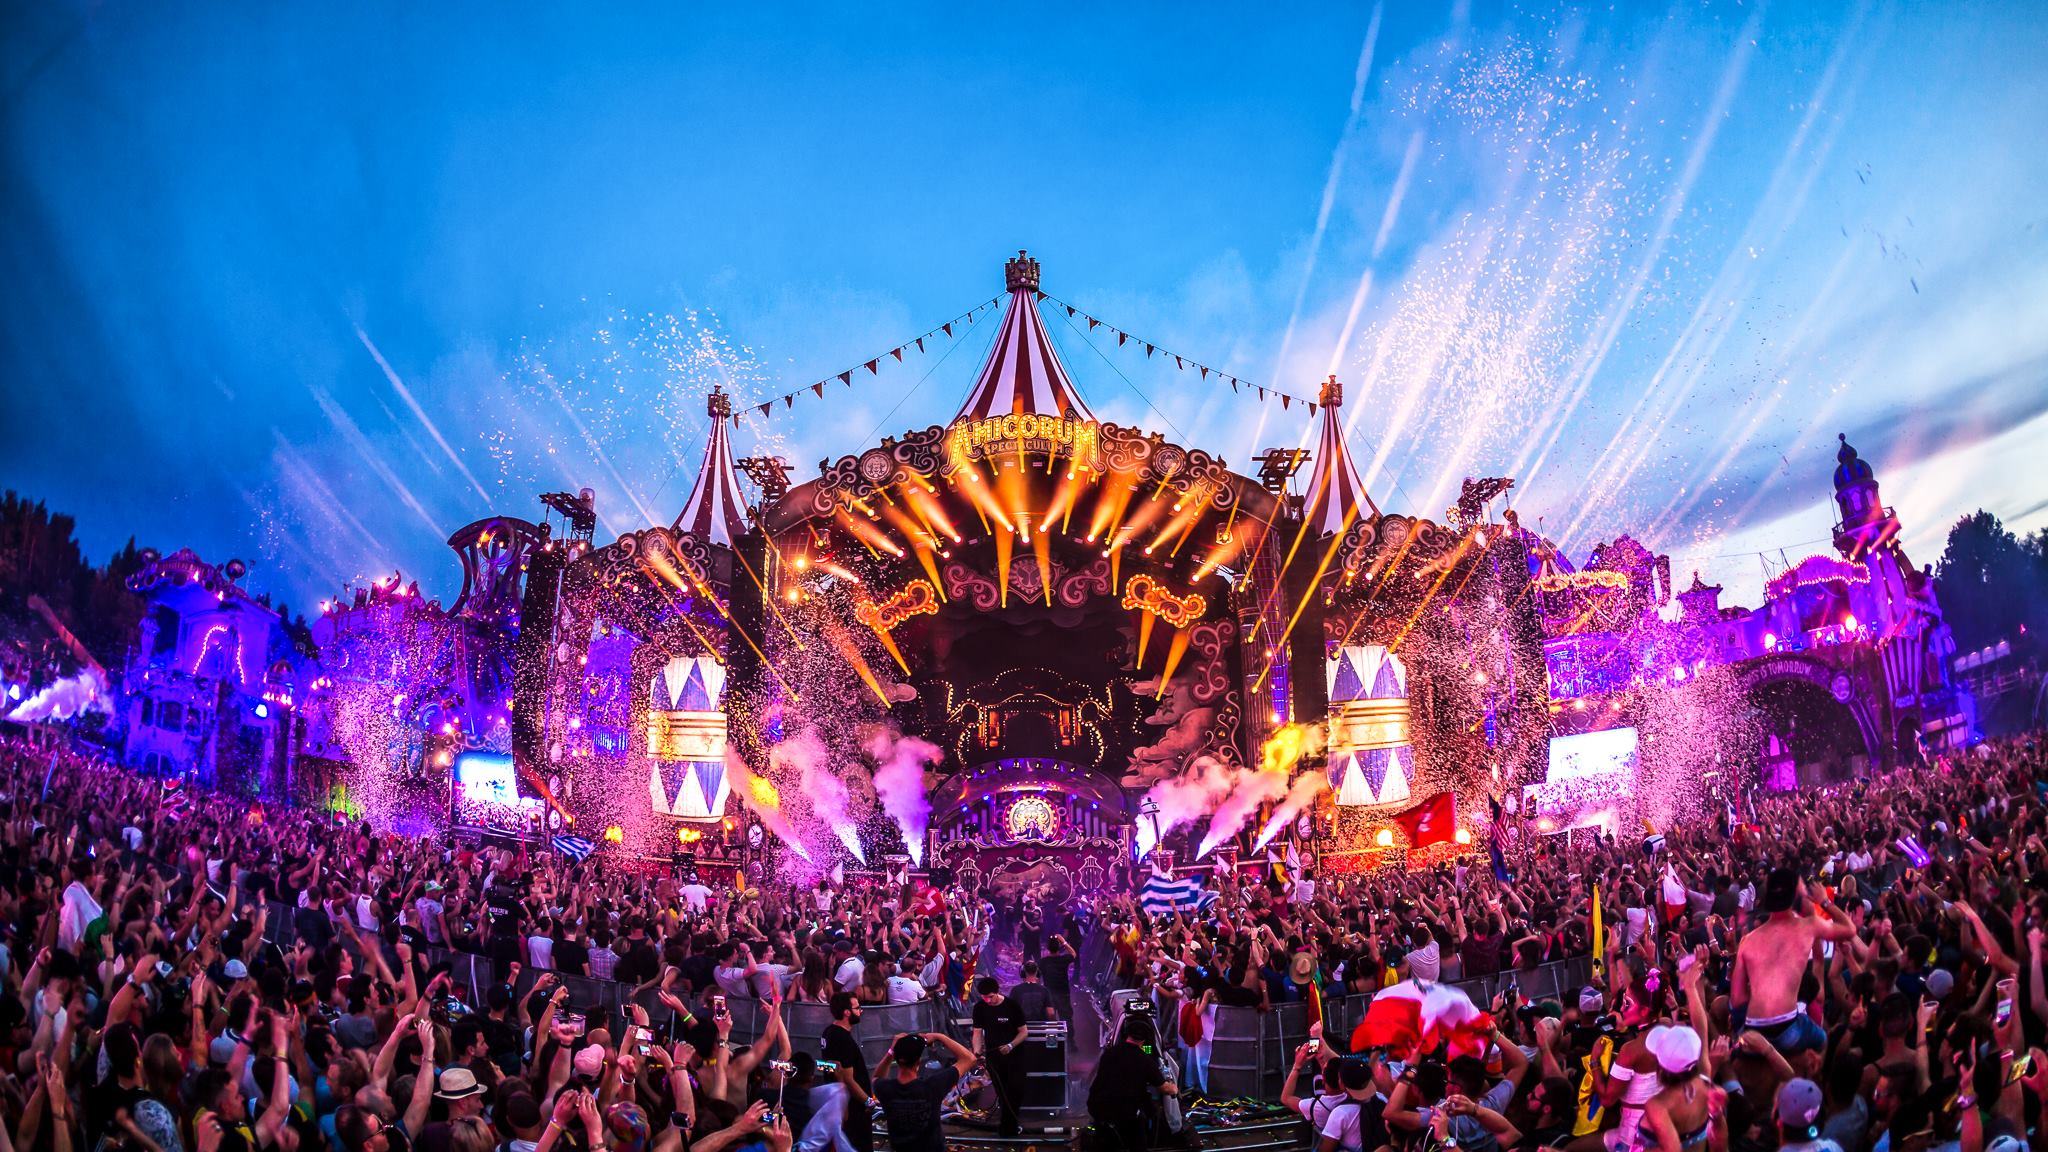 Three Big Announcements Coming From Tomorrowland this Week